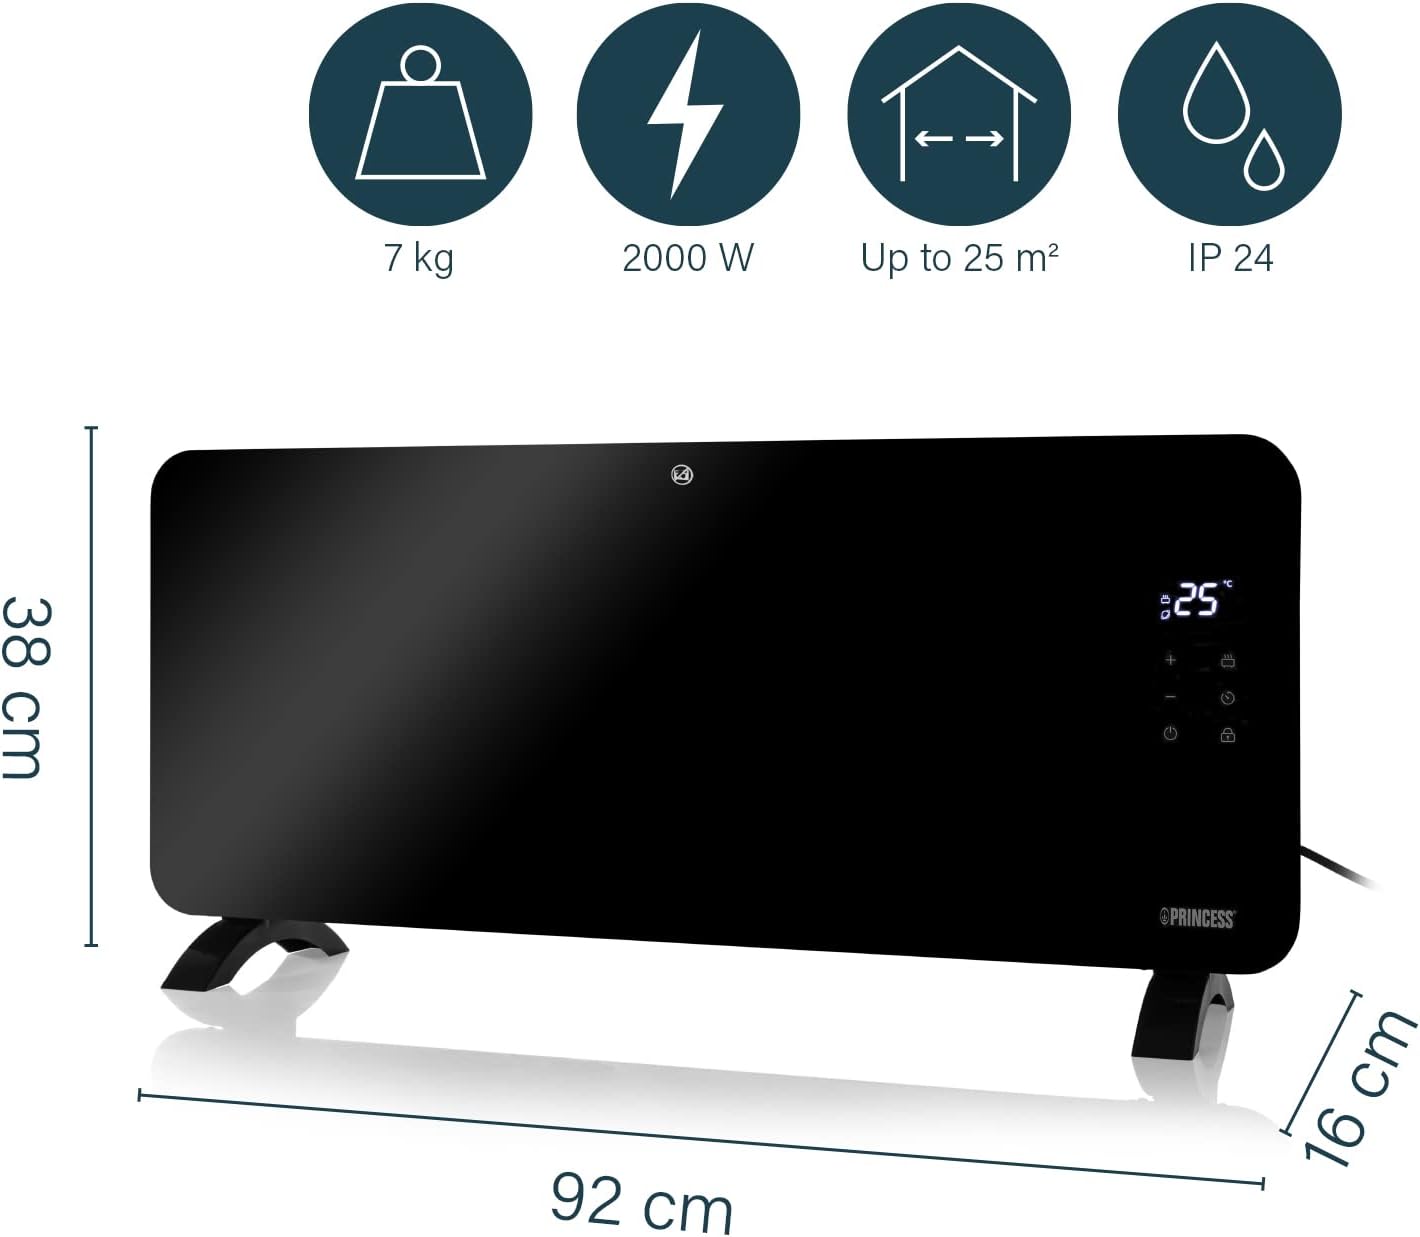 Princess connected electric heater - Convection heating - Manual, app or voice control - Free app - Glass panel - 2000 W - Black - 348200 - Amazing Gadgets Outlet